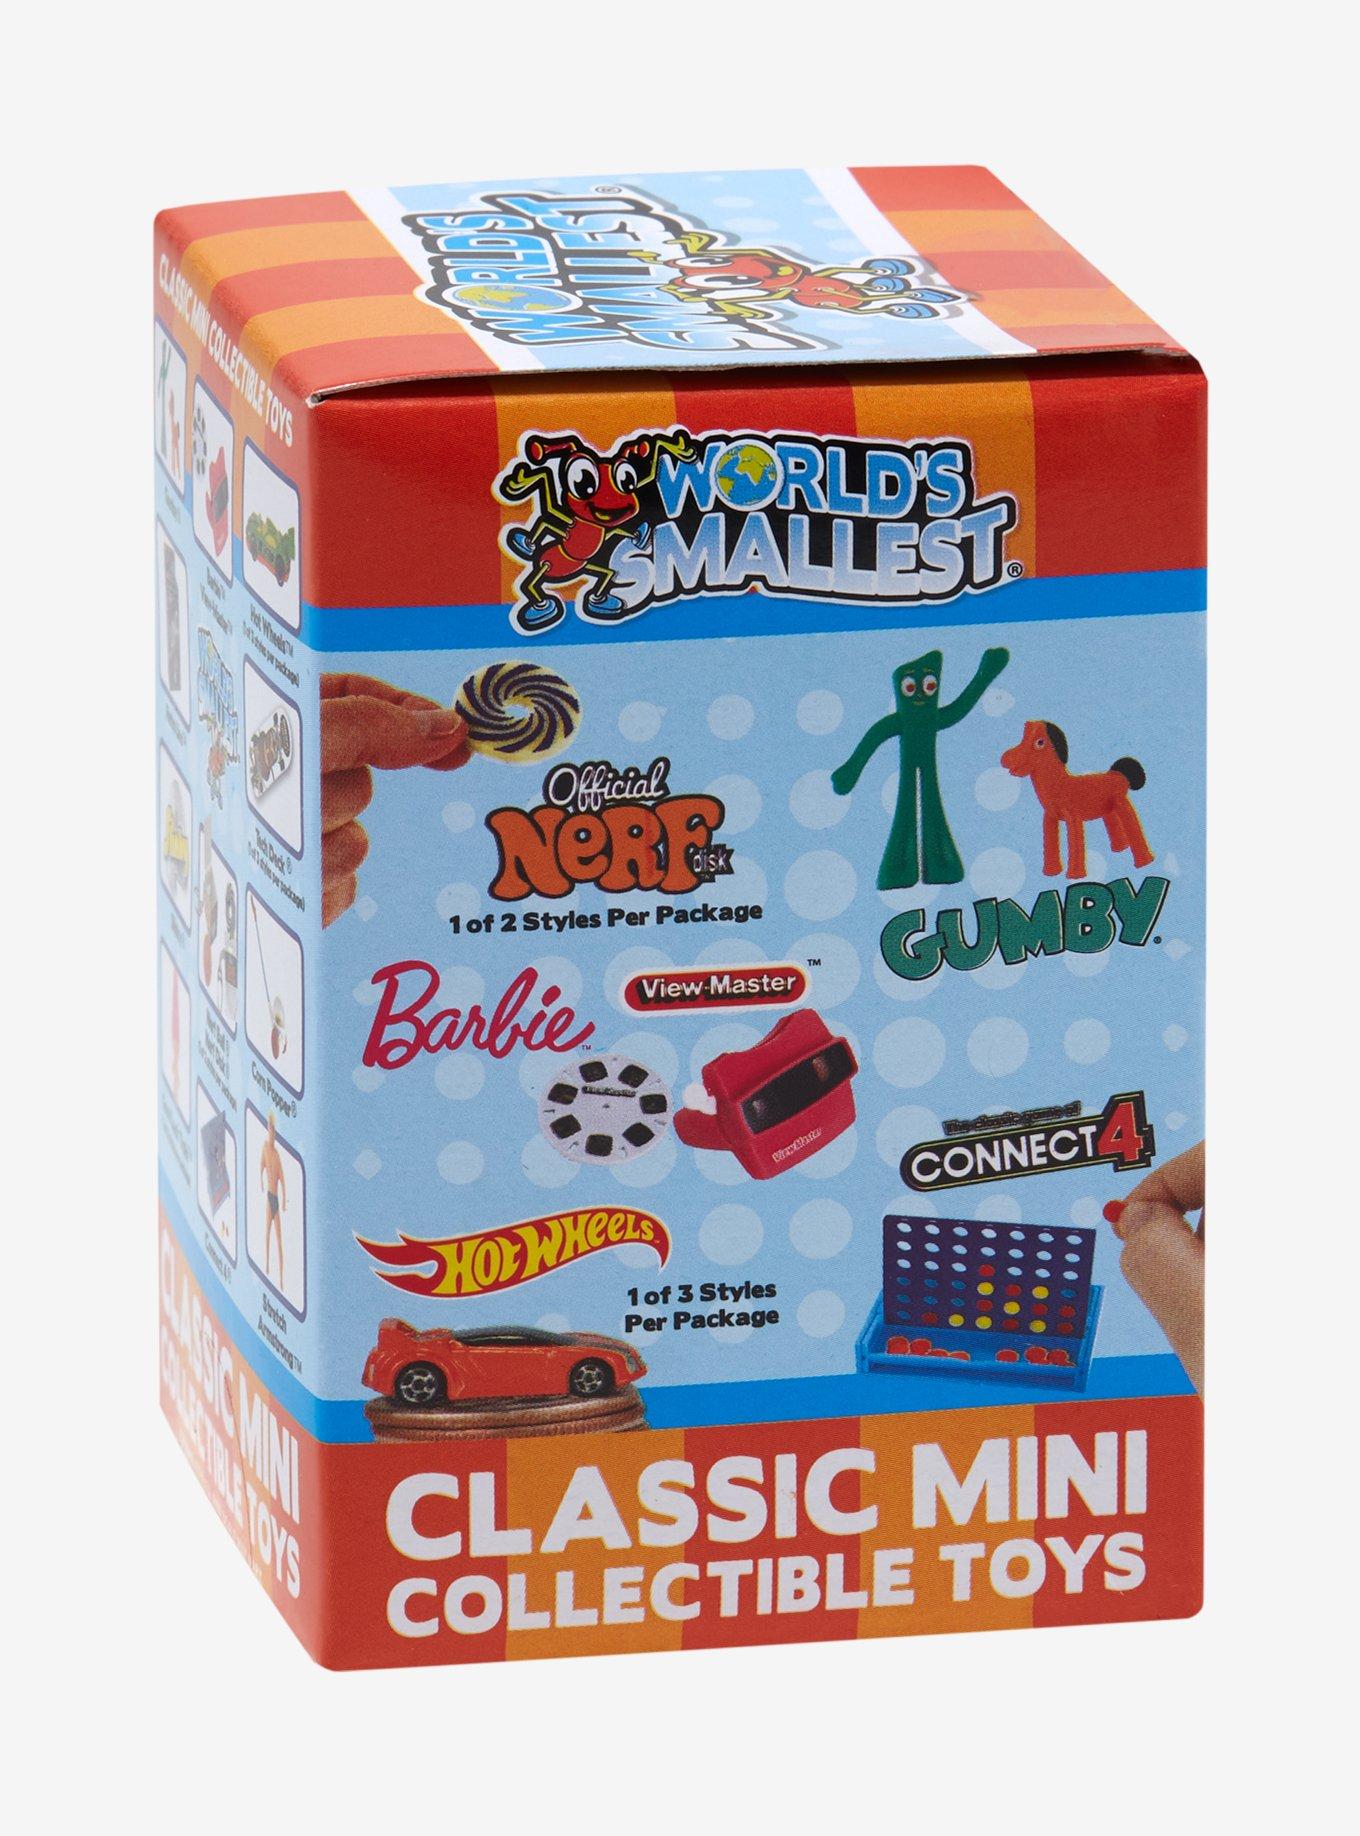 World's Smallest Blind Box Series 2, 1 ct - Fry's Food Stores